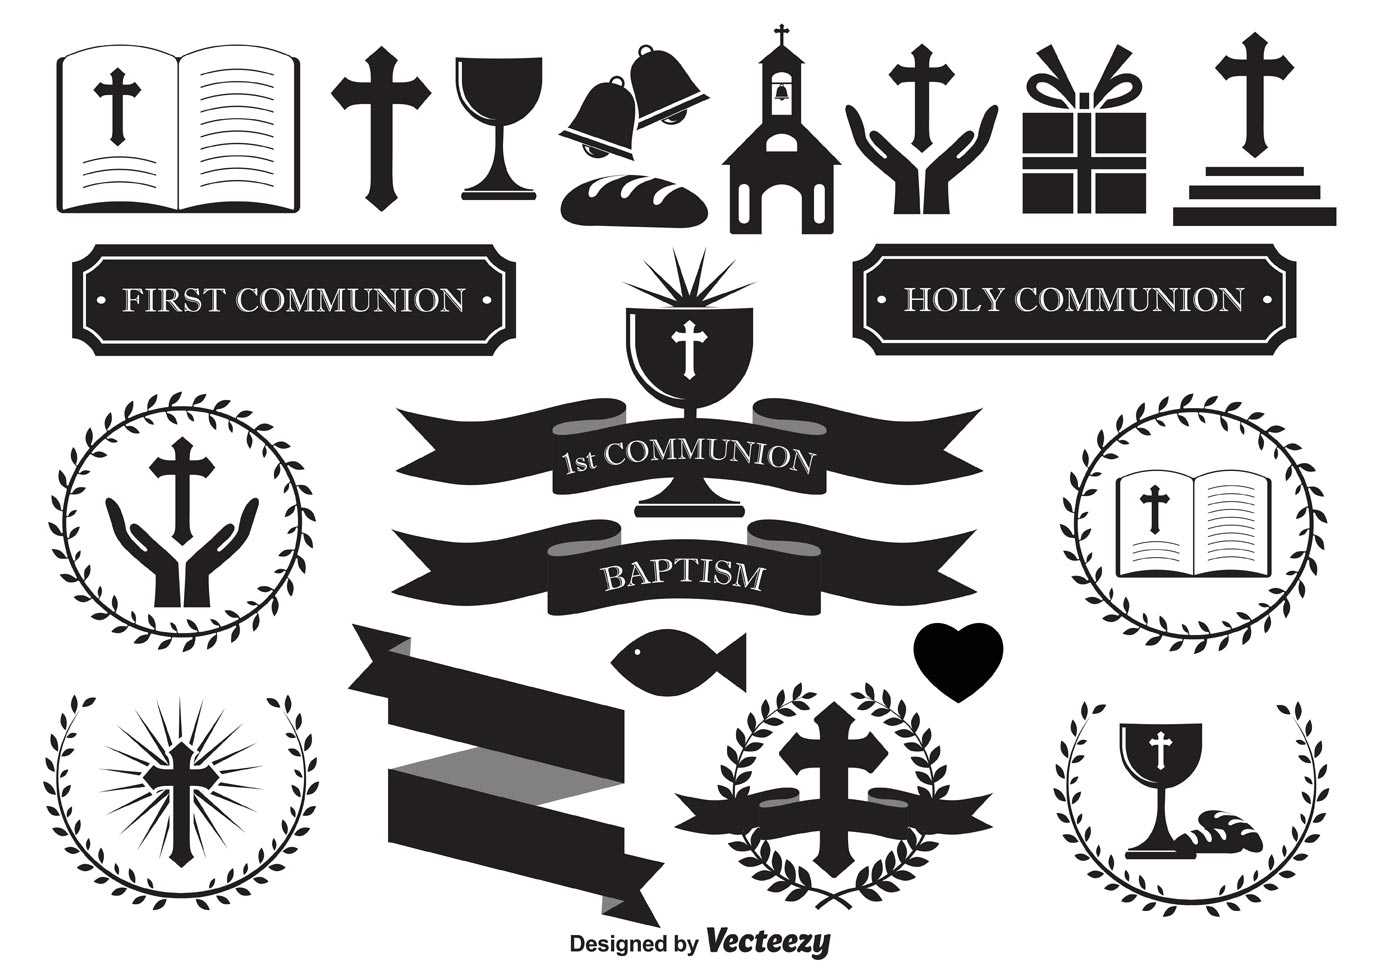 First Communion Free Vector Art – (882 Free Downloads) With Regard To First Communion Banner Templates